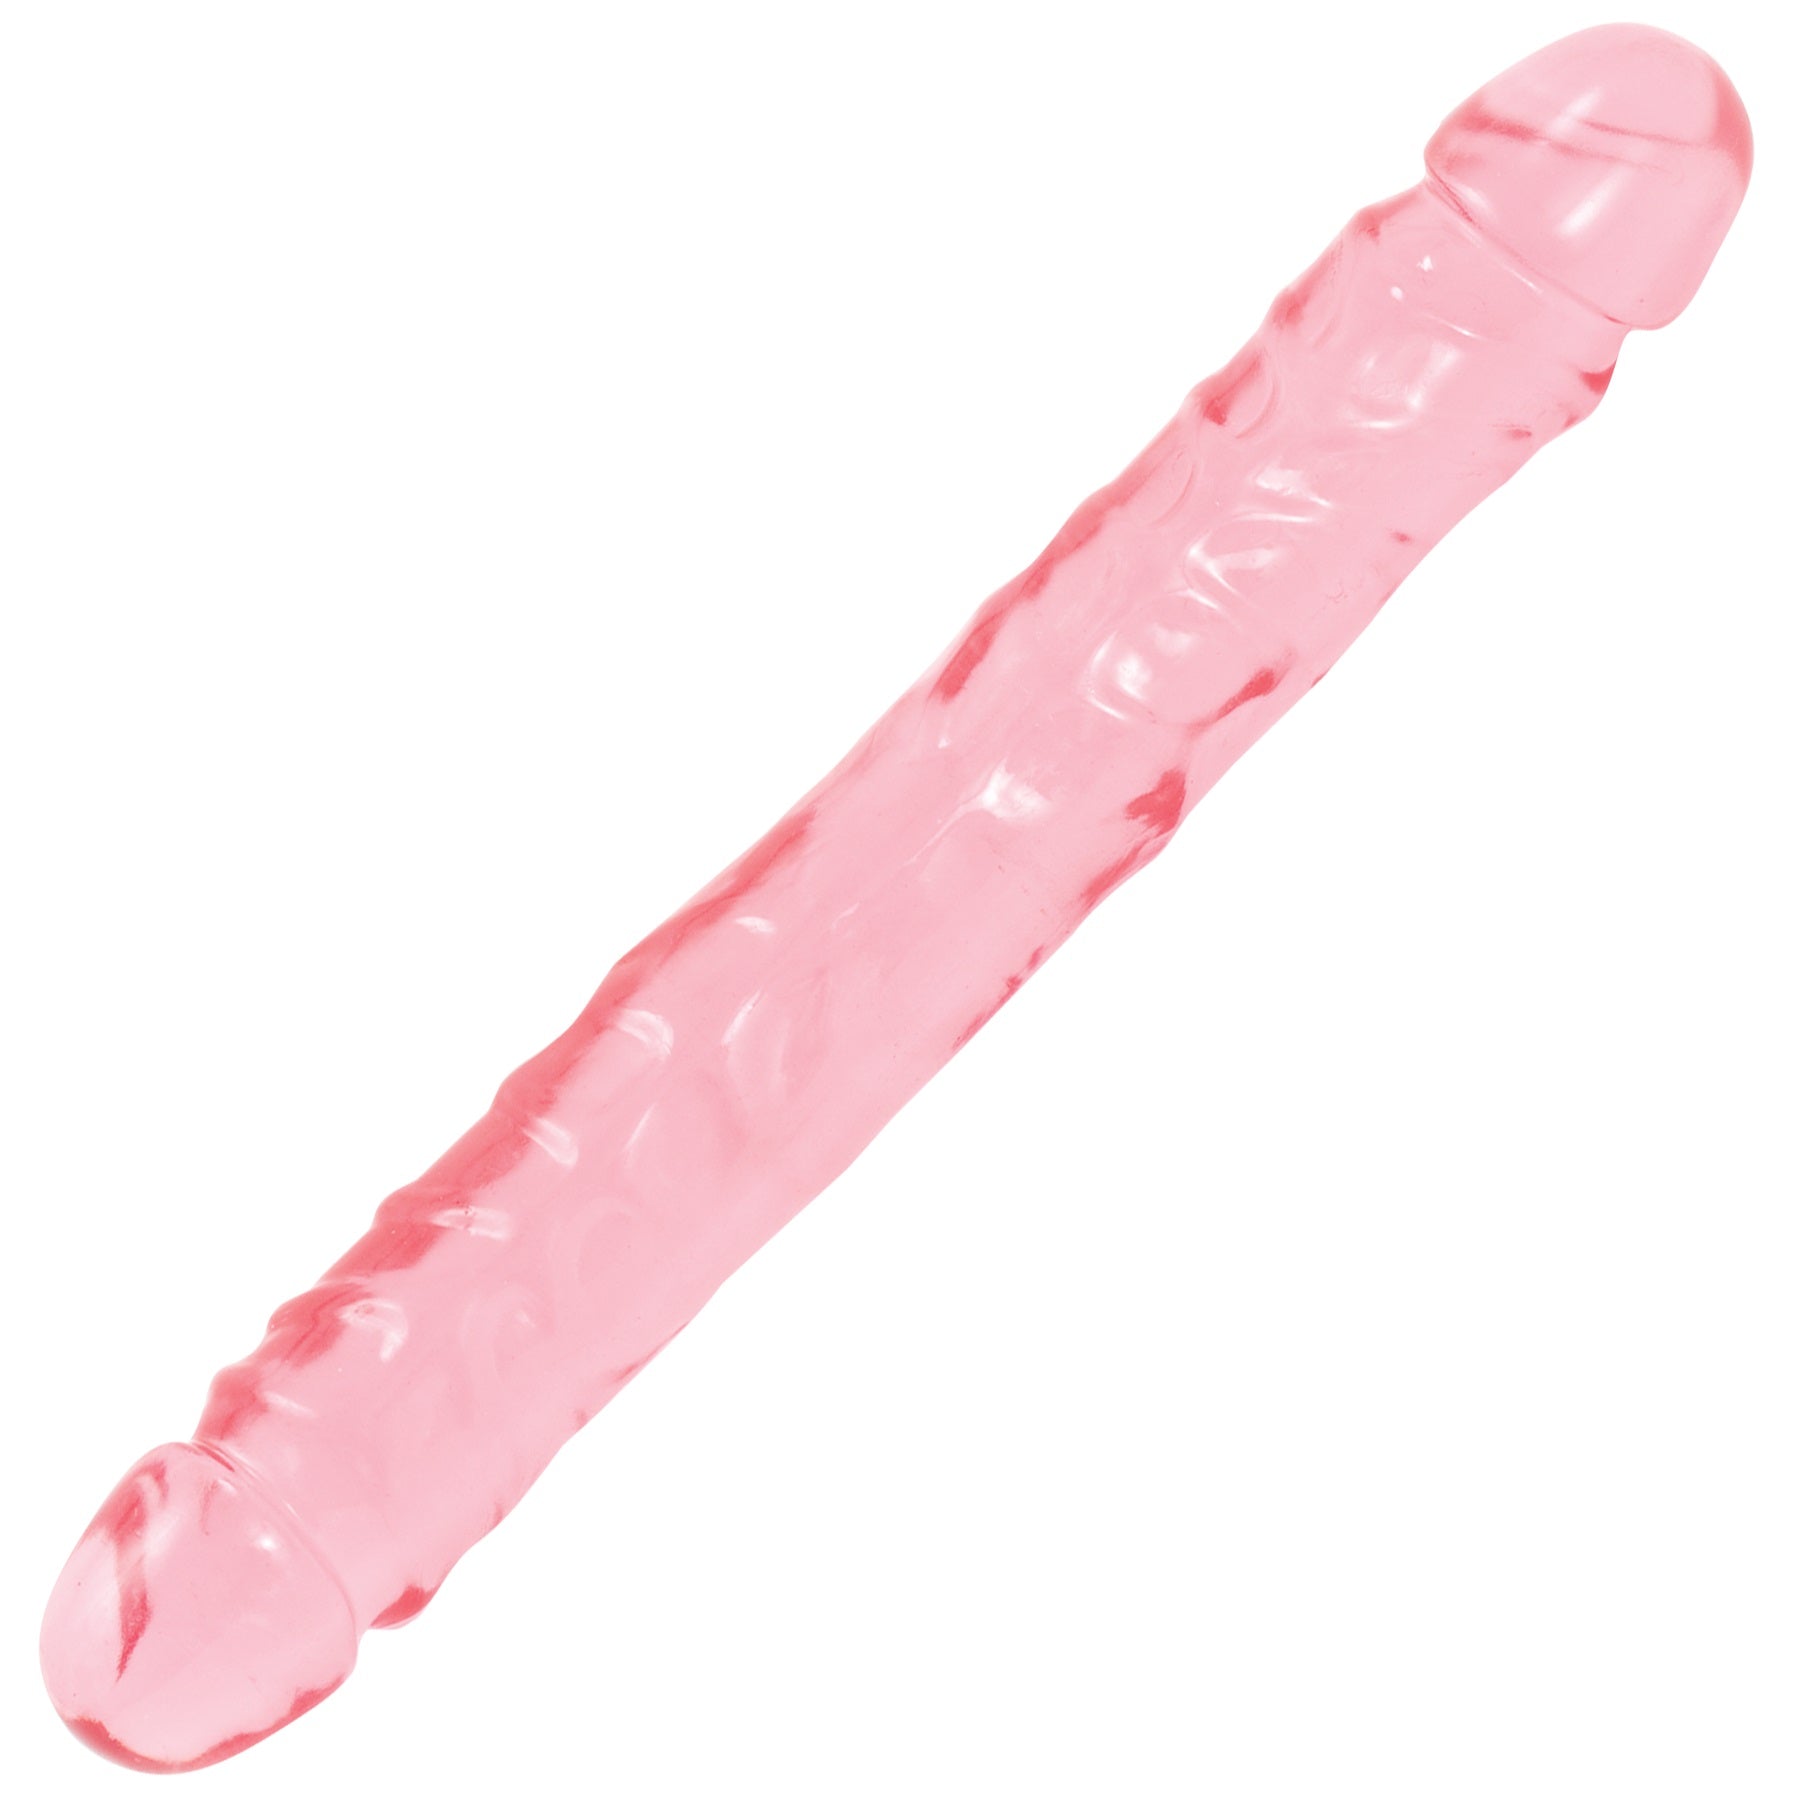 12-Inch Jr. Double-Ended Dildo by Crystal Jellies